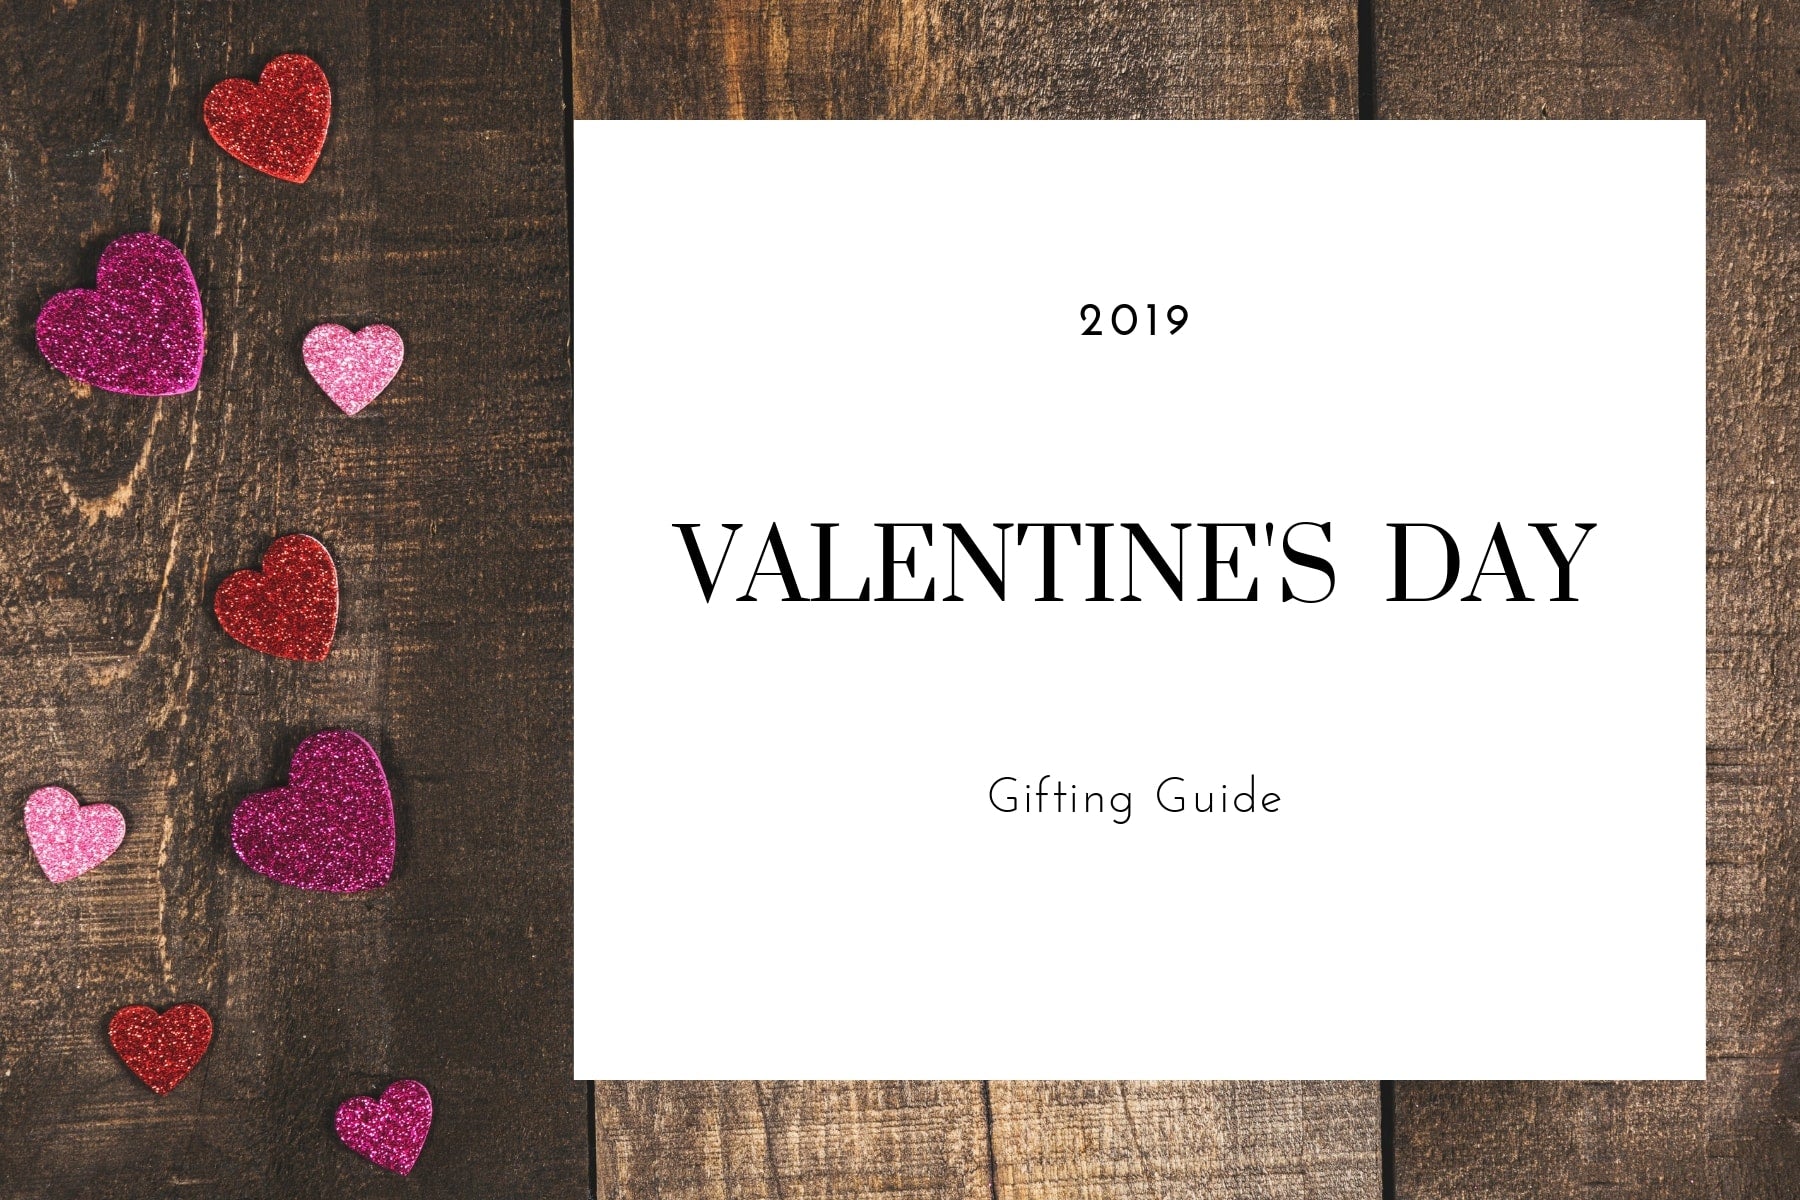 Home Artisan's Valentine's Day Gifting Guide